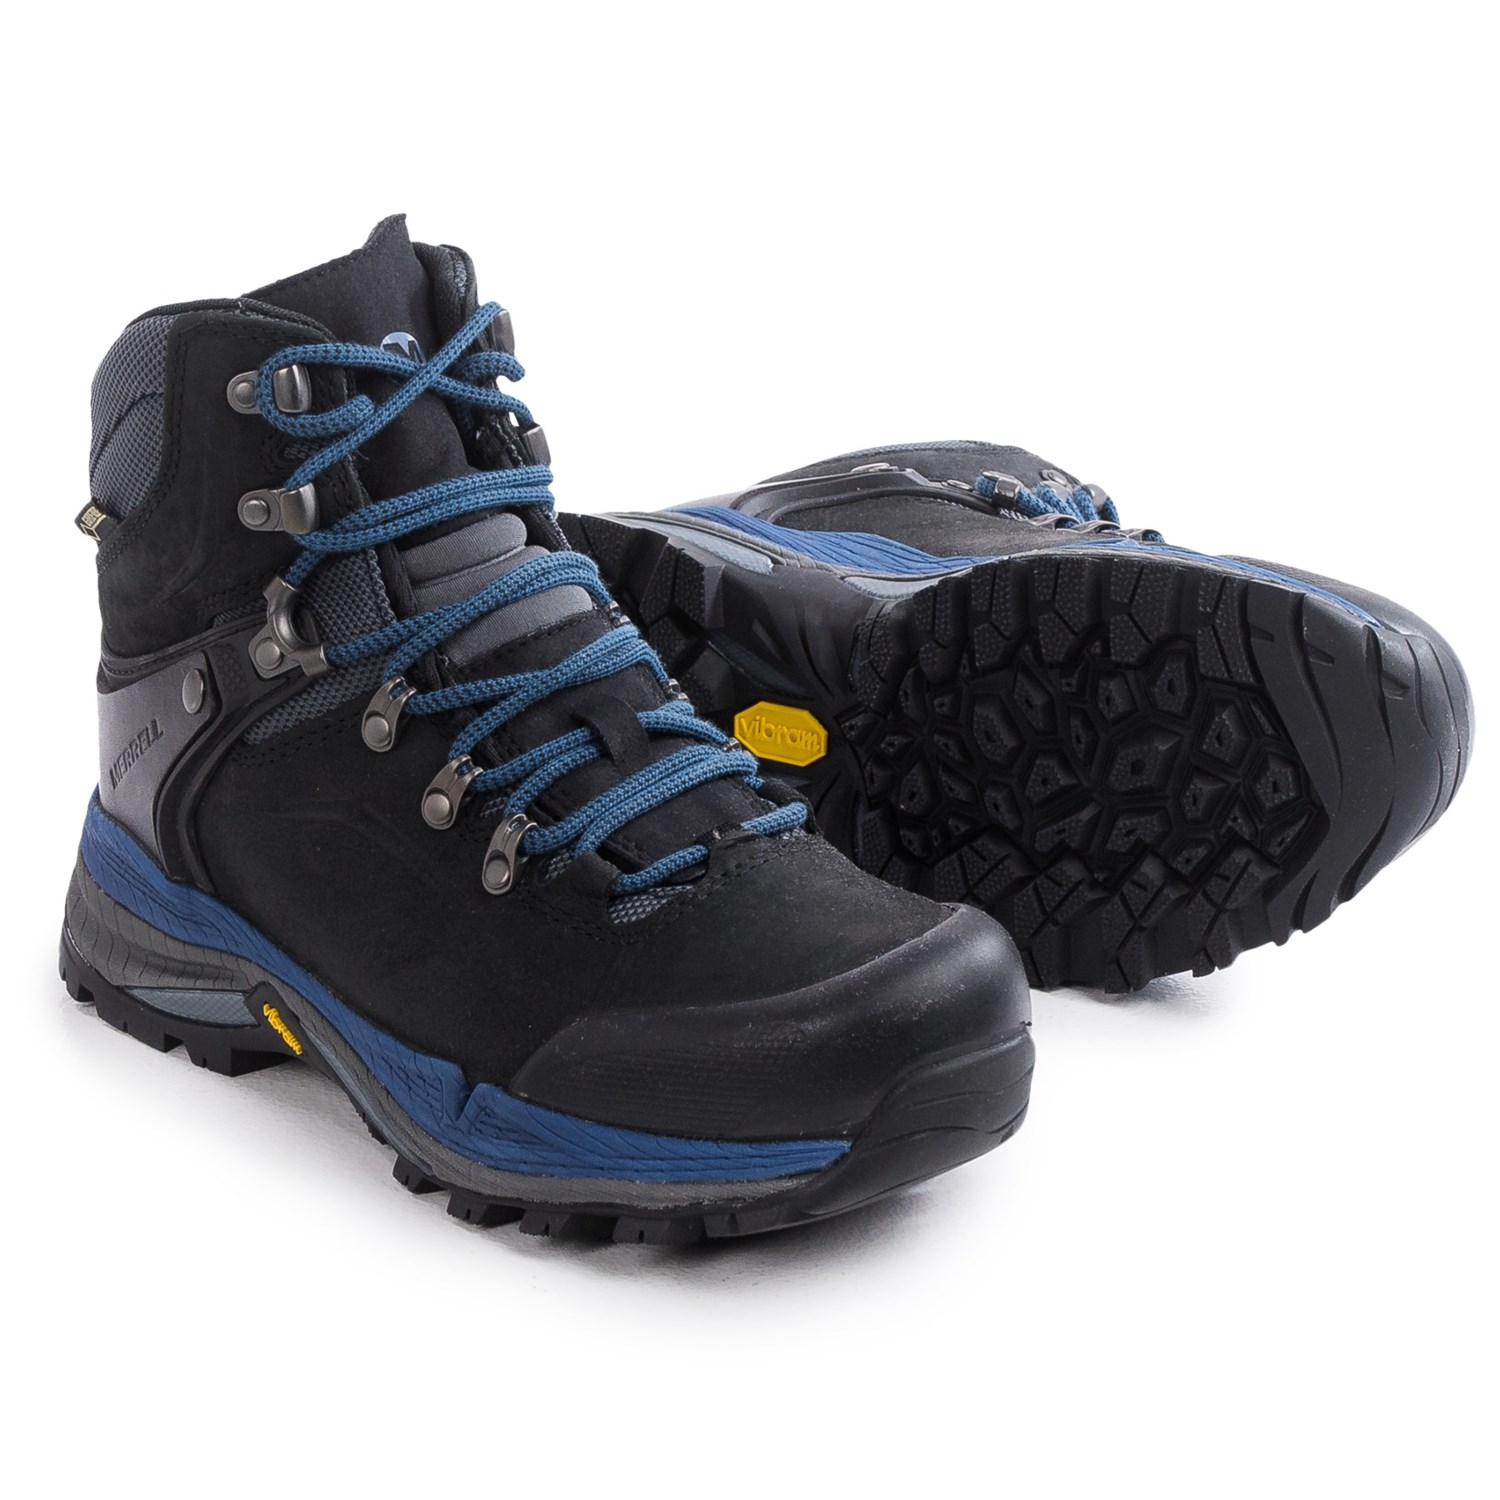 Merrell Crestbound Gore-Tex® Hiking Boots (For Women) - Save 47%